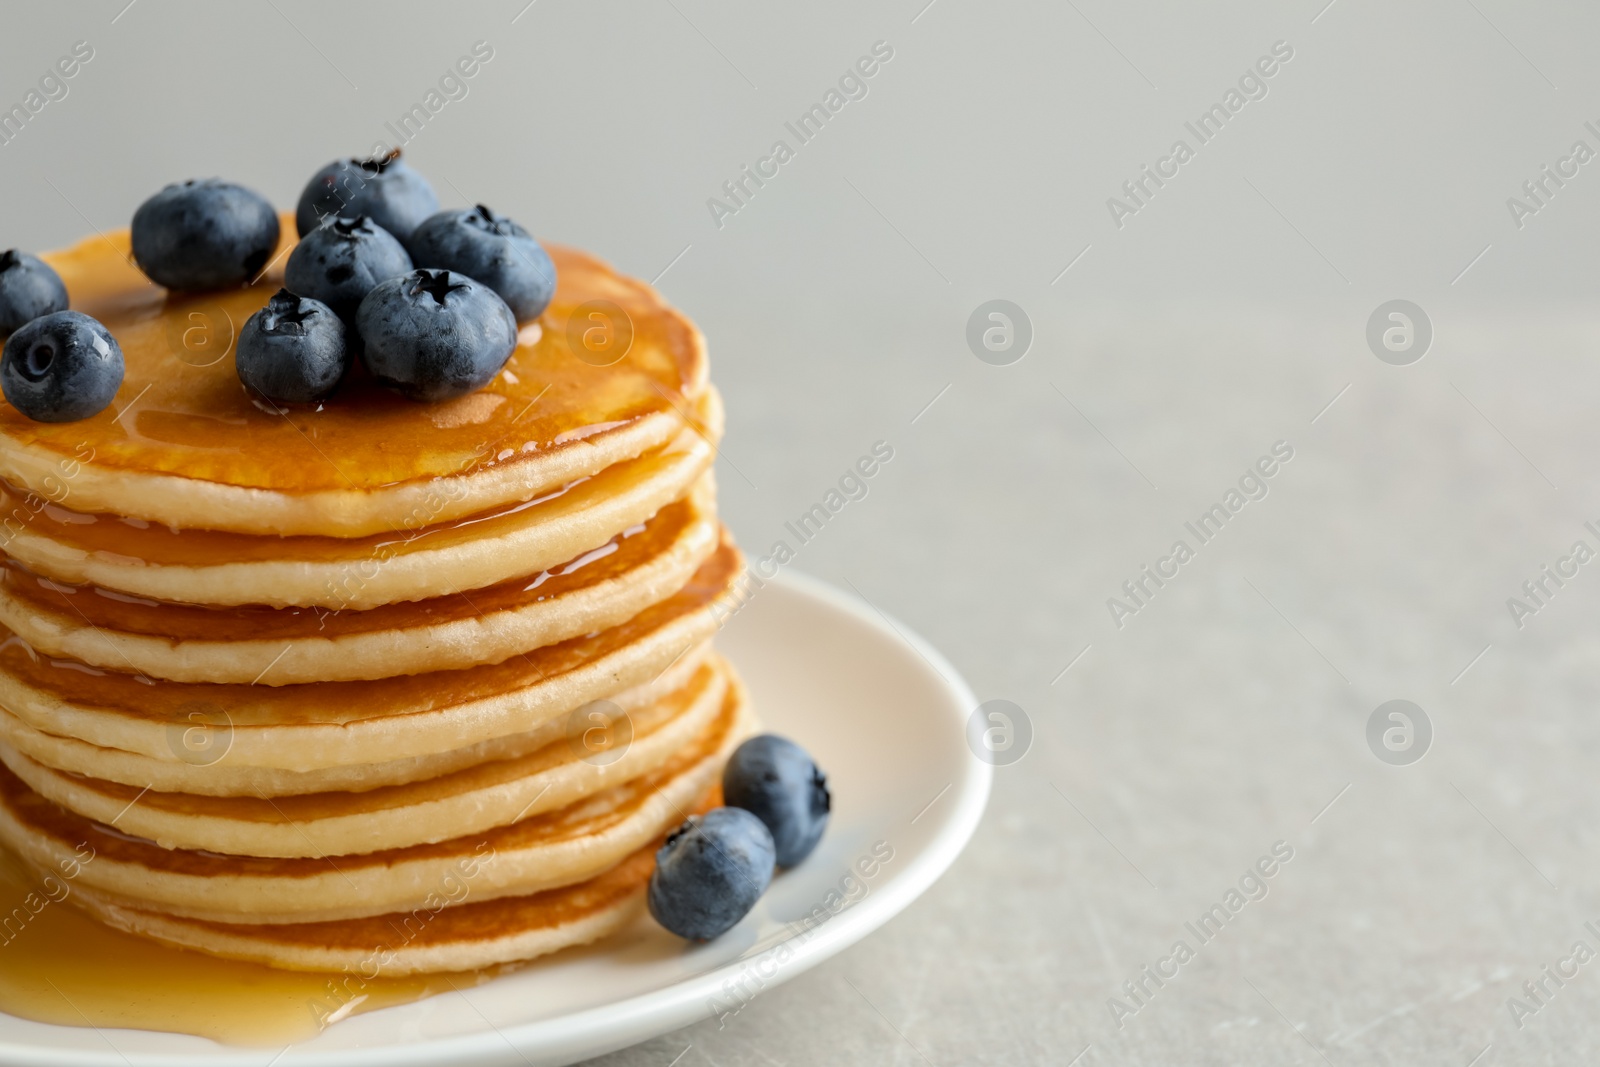 Photo of Plate with pancakes and berries on grey background, closeup